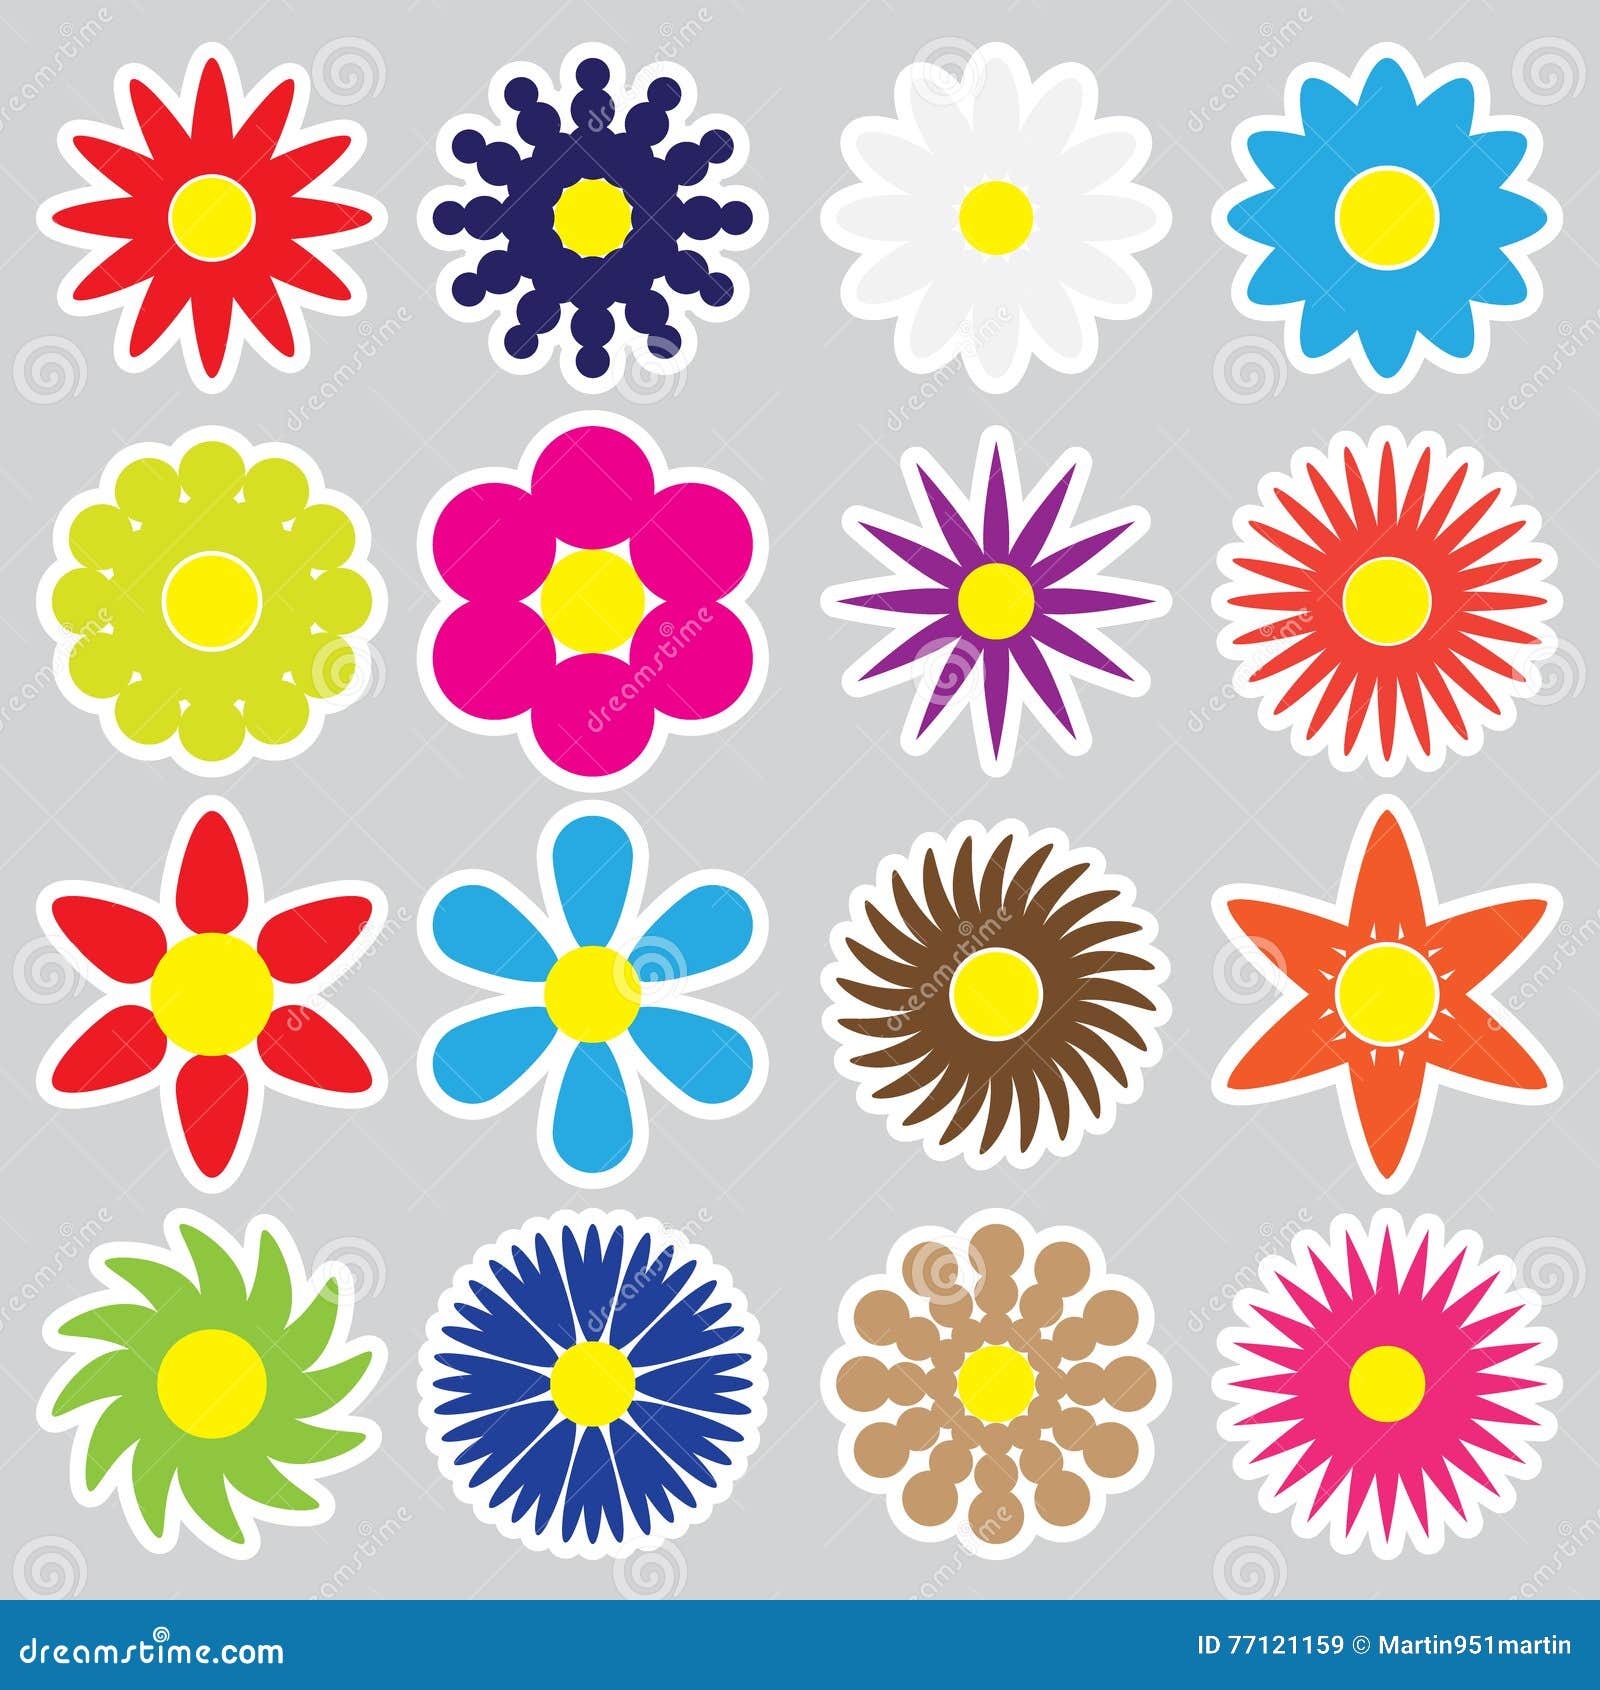 Colorful Simple Retro Small Flowers Set of Stickers Eps10 Stock Vector ...